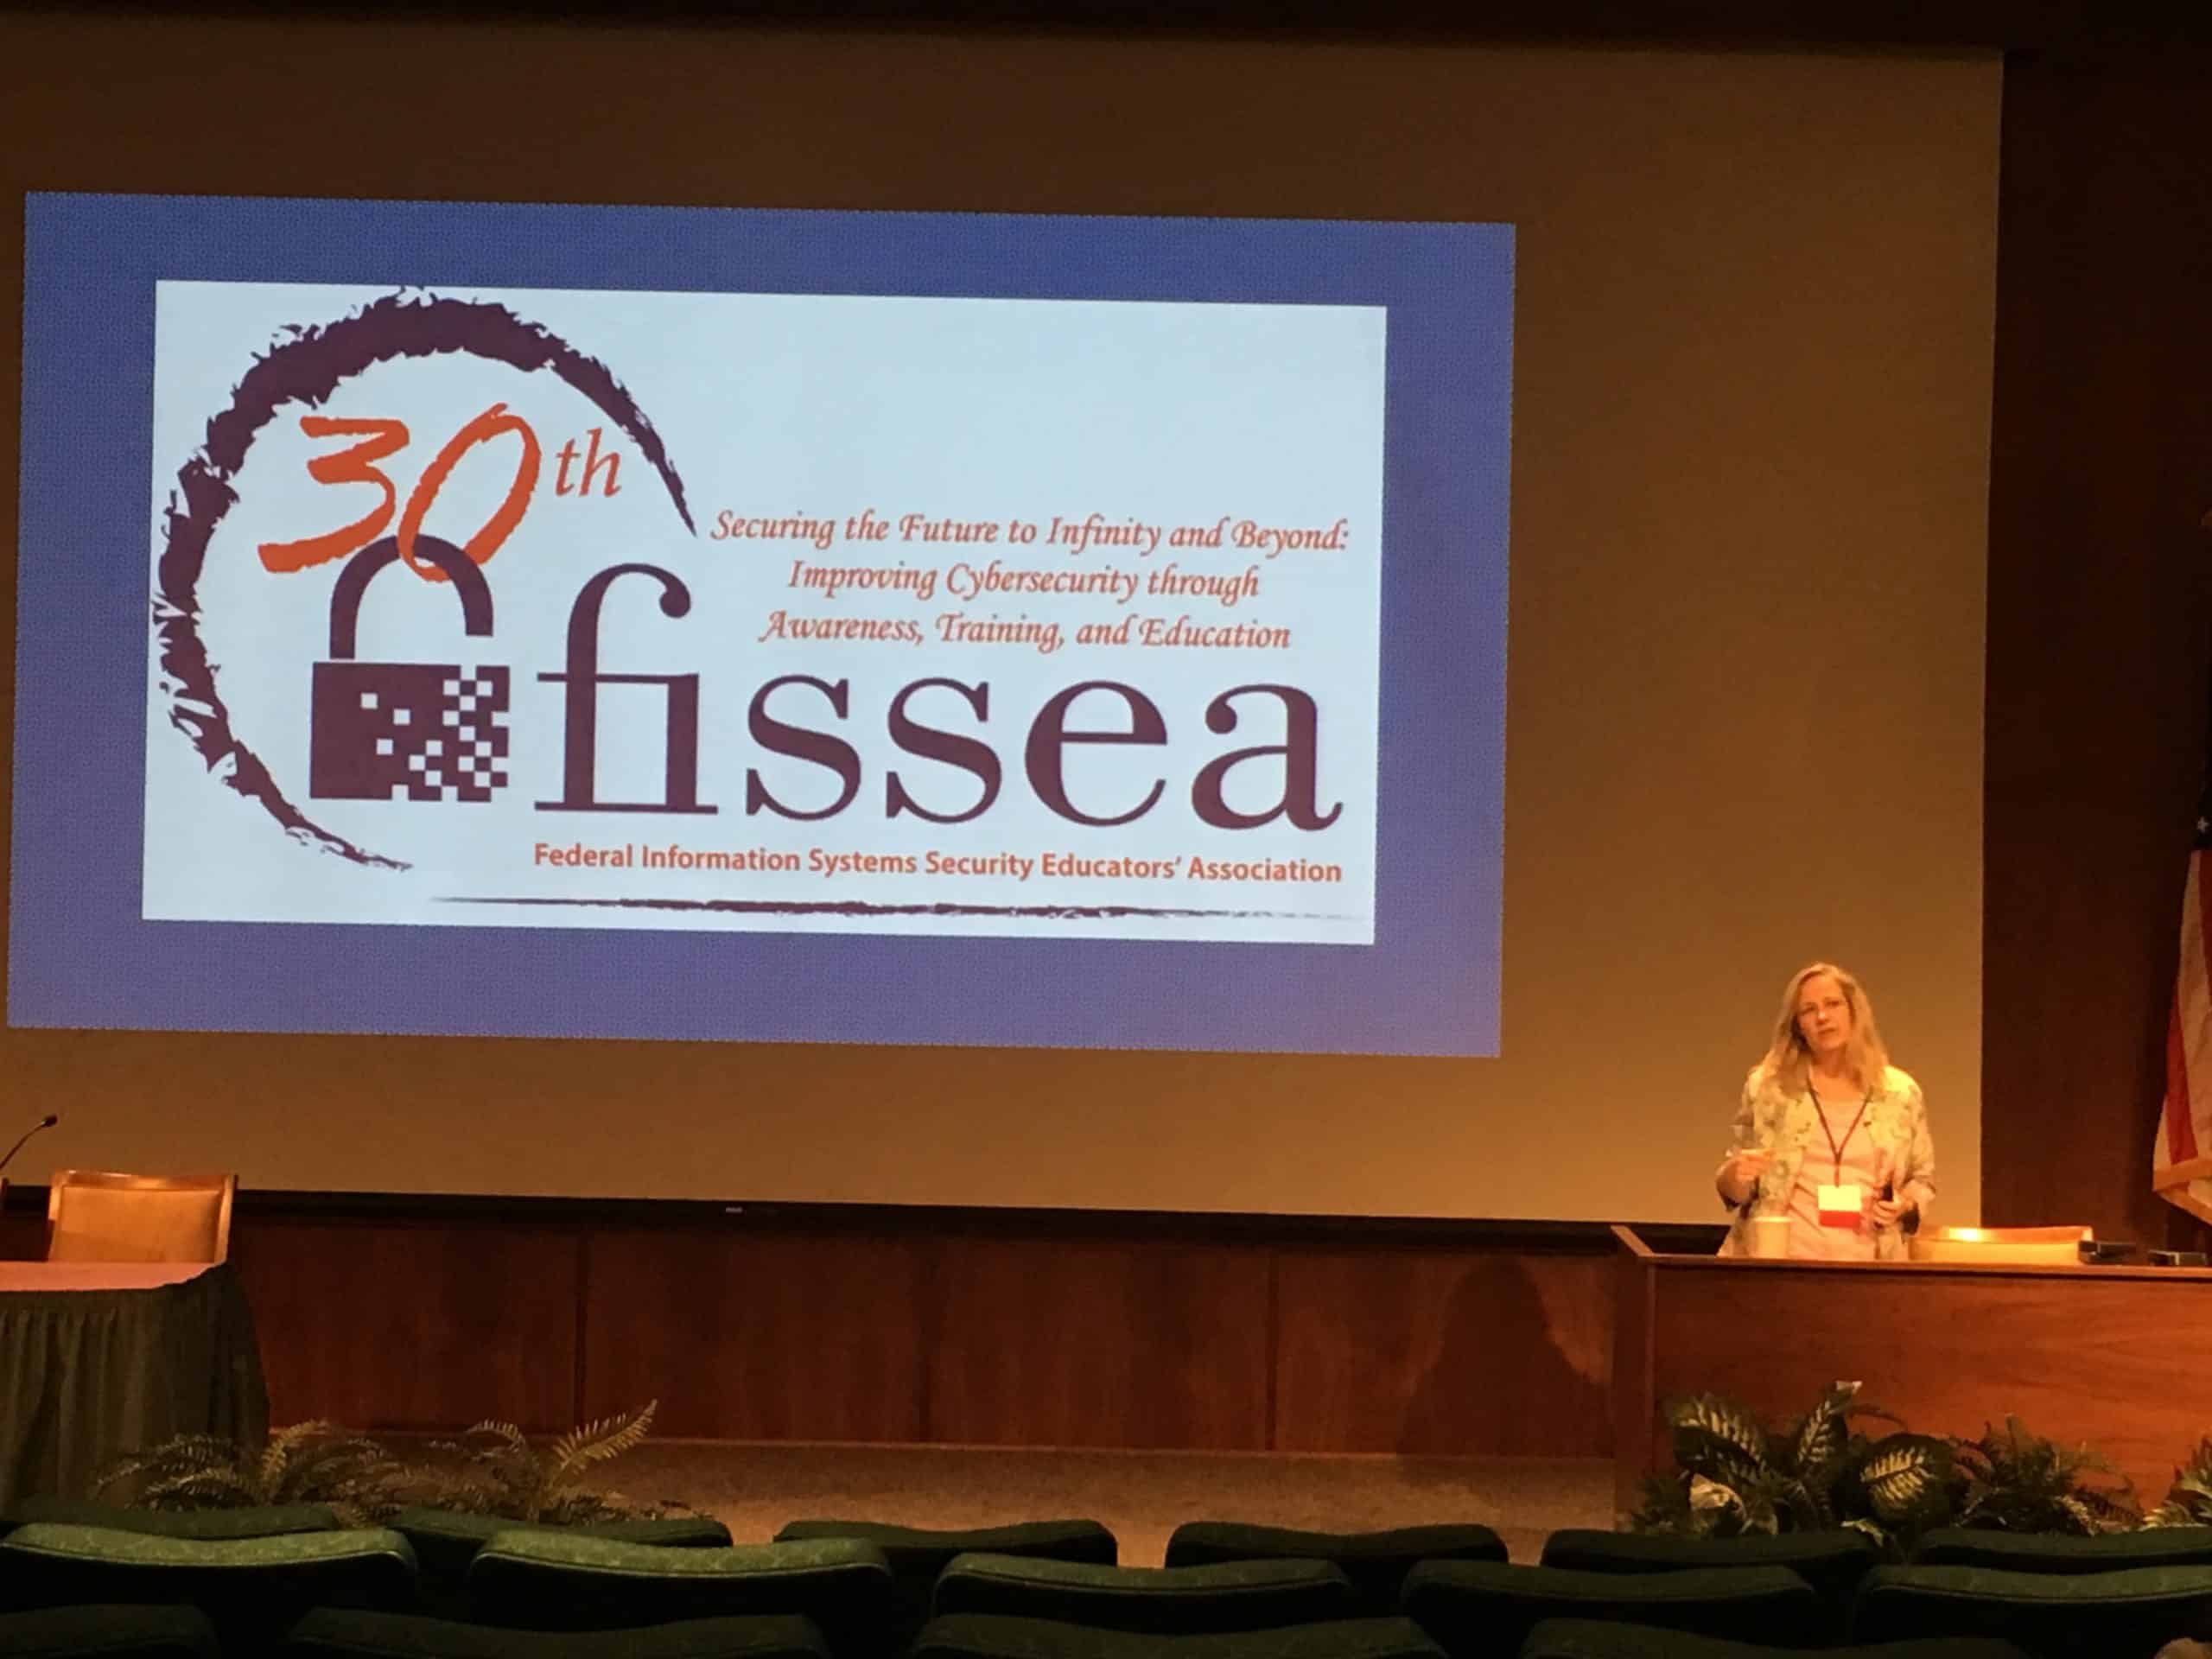 30th Annual FISSEA Conference presentation by Susan Hansche